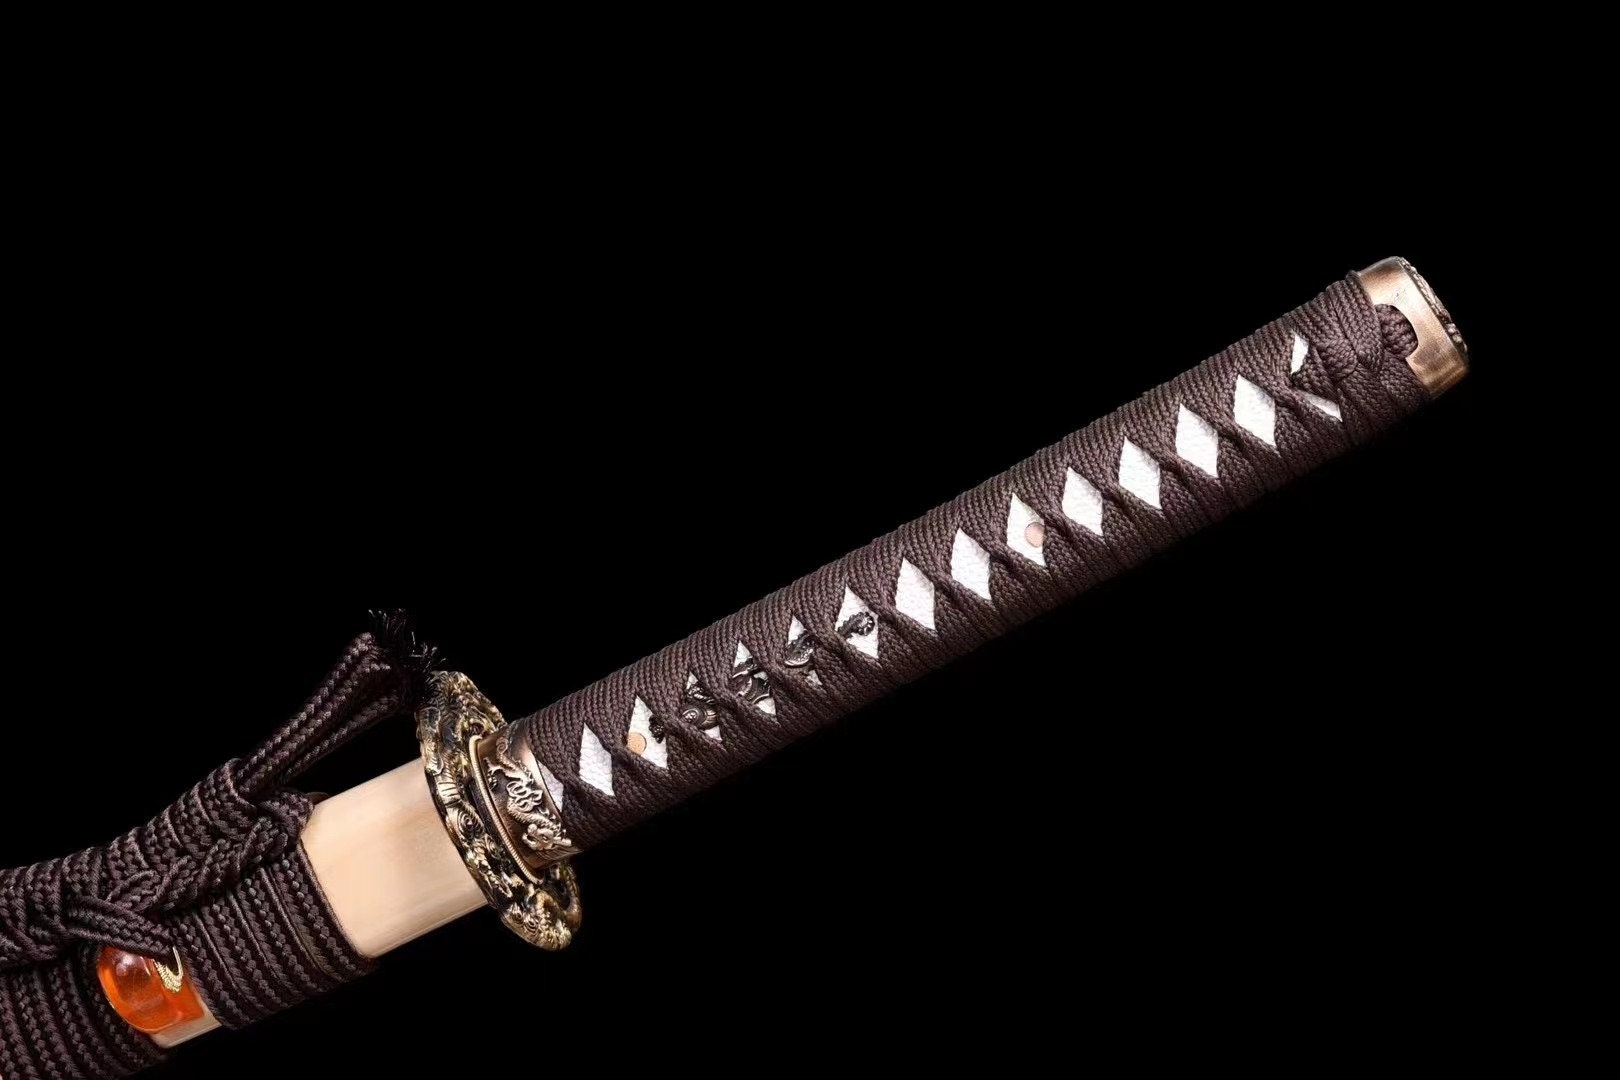 Katana real, fighting sword, Japanese sword, 1060 high manganese steel  blade, hand-ground, full Tang, tempered, hand-forged, 41 inches